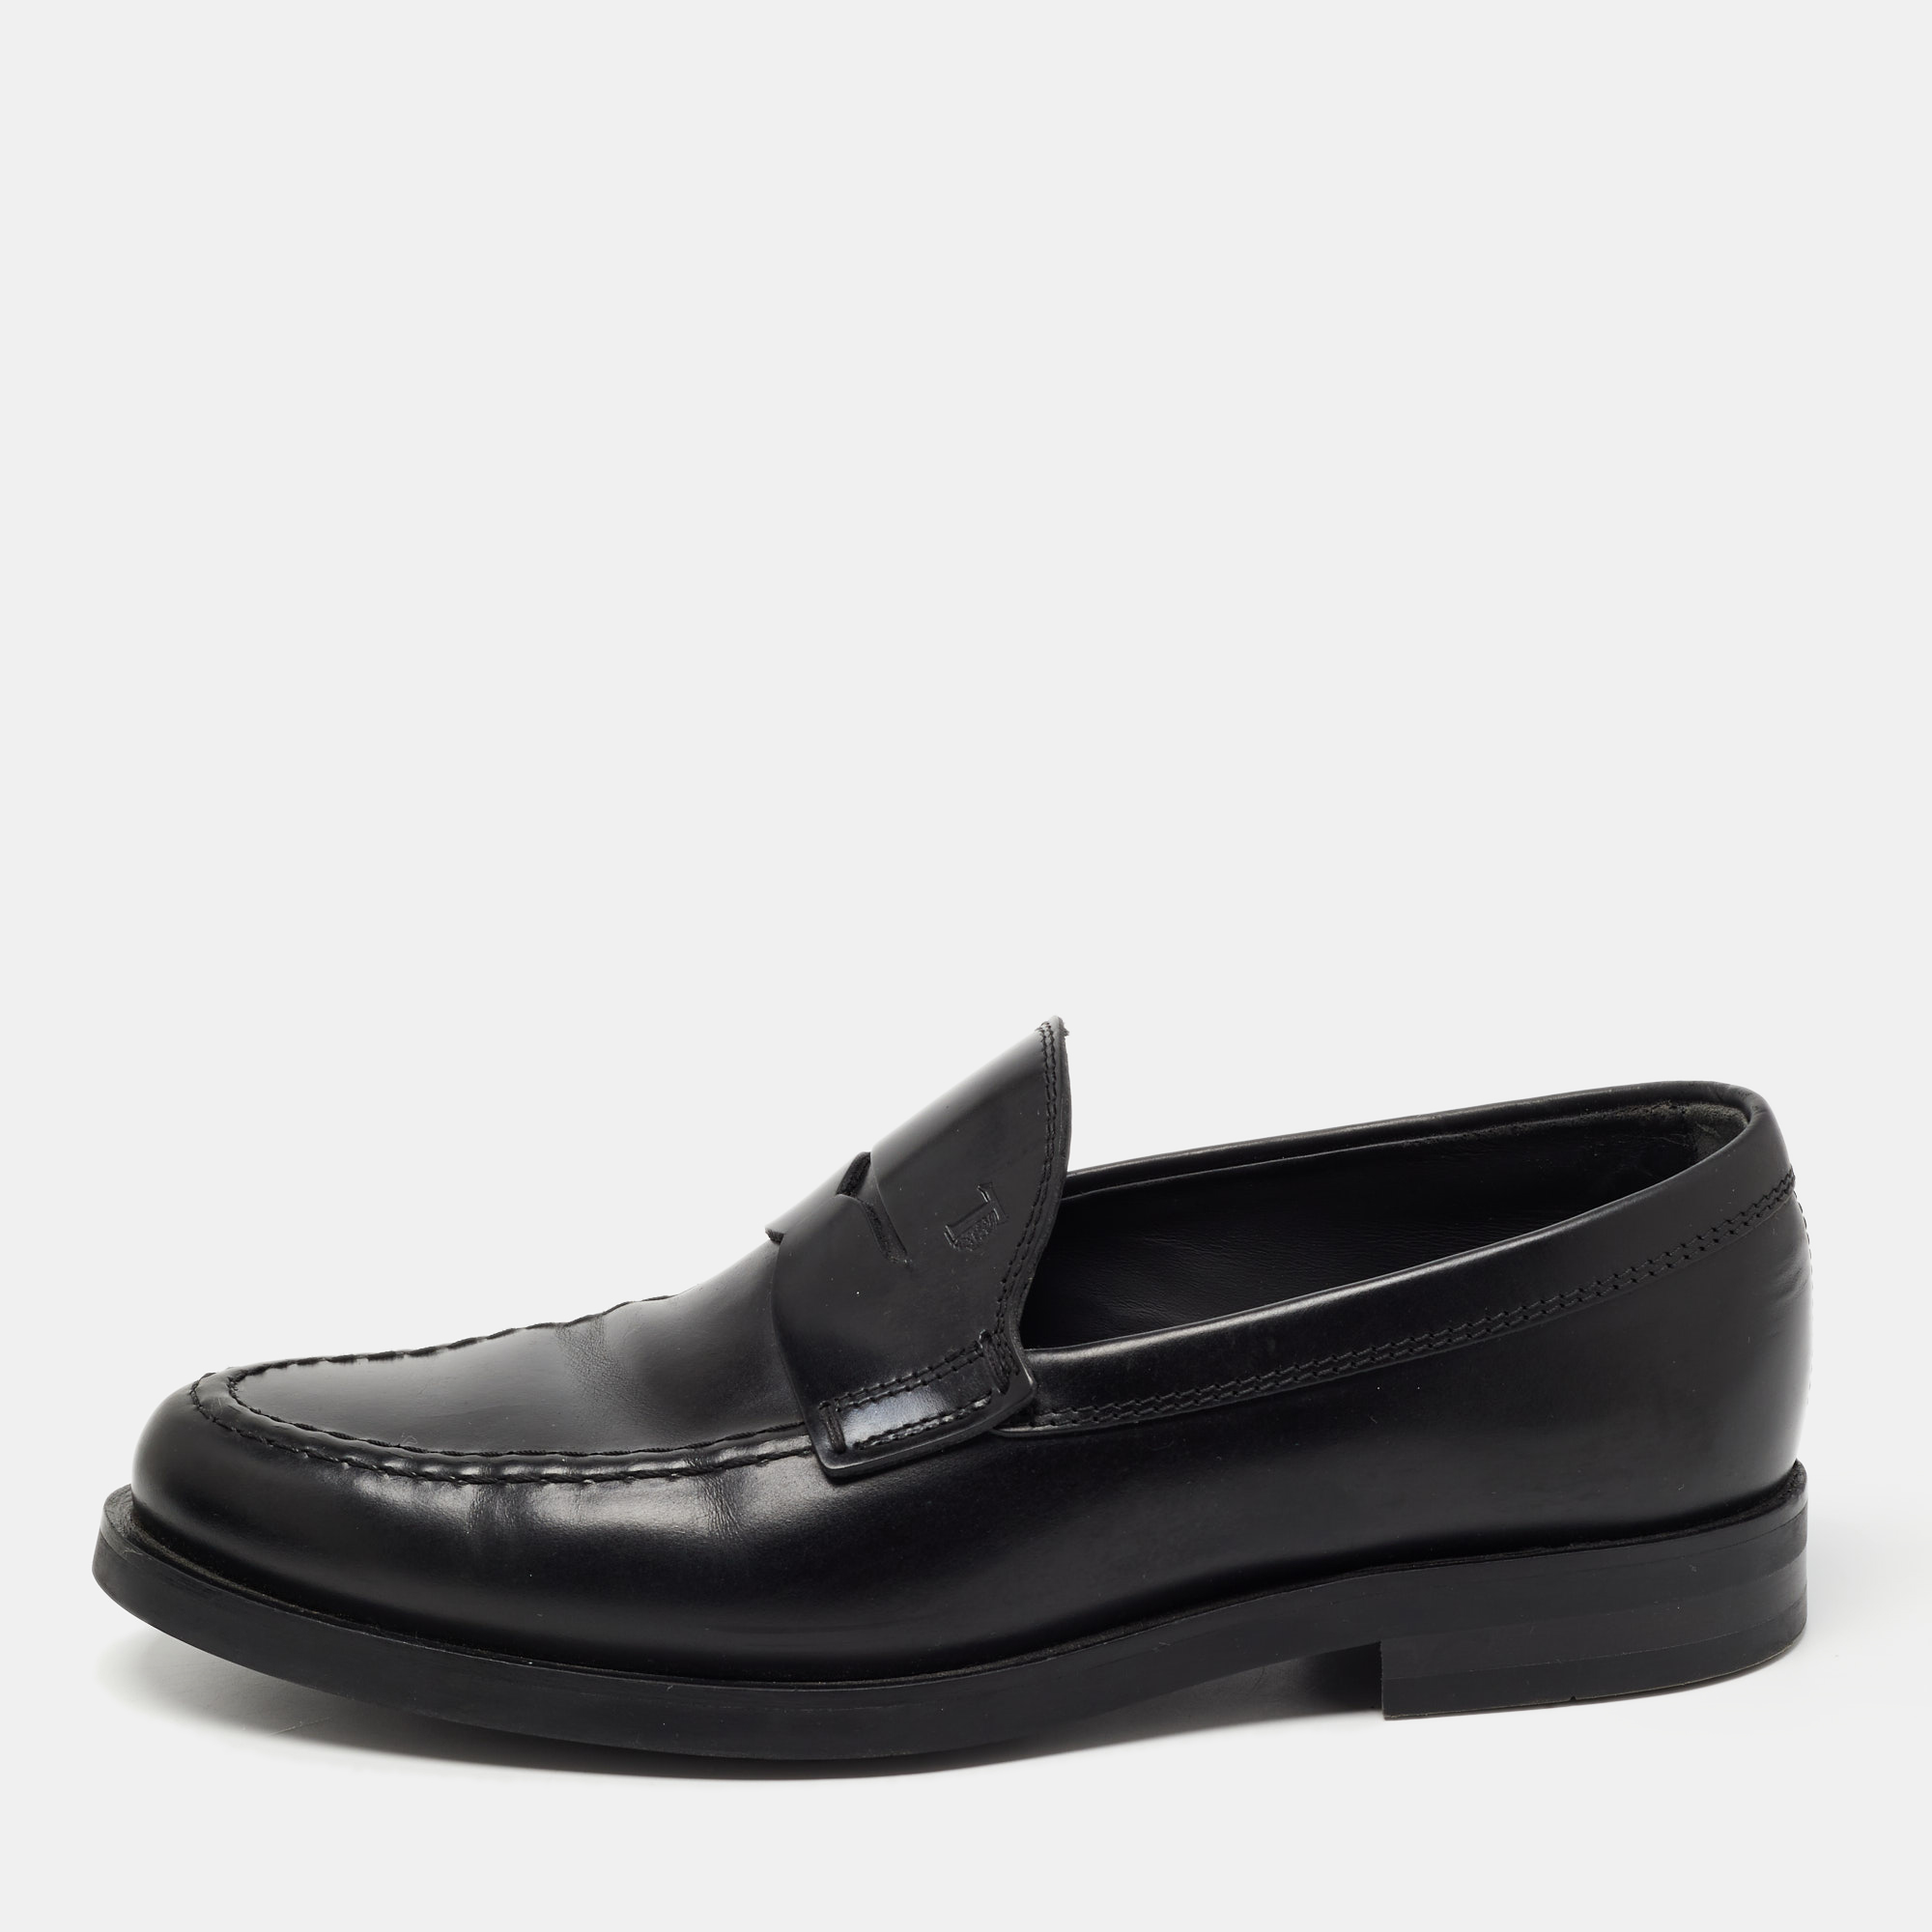 Pre-owned Tod's Tods Black Leather Gommino Driving Slip On Loafer Size 40